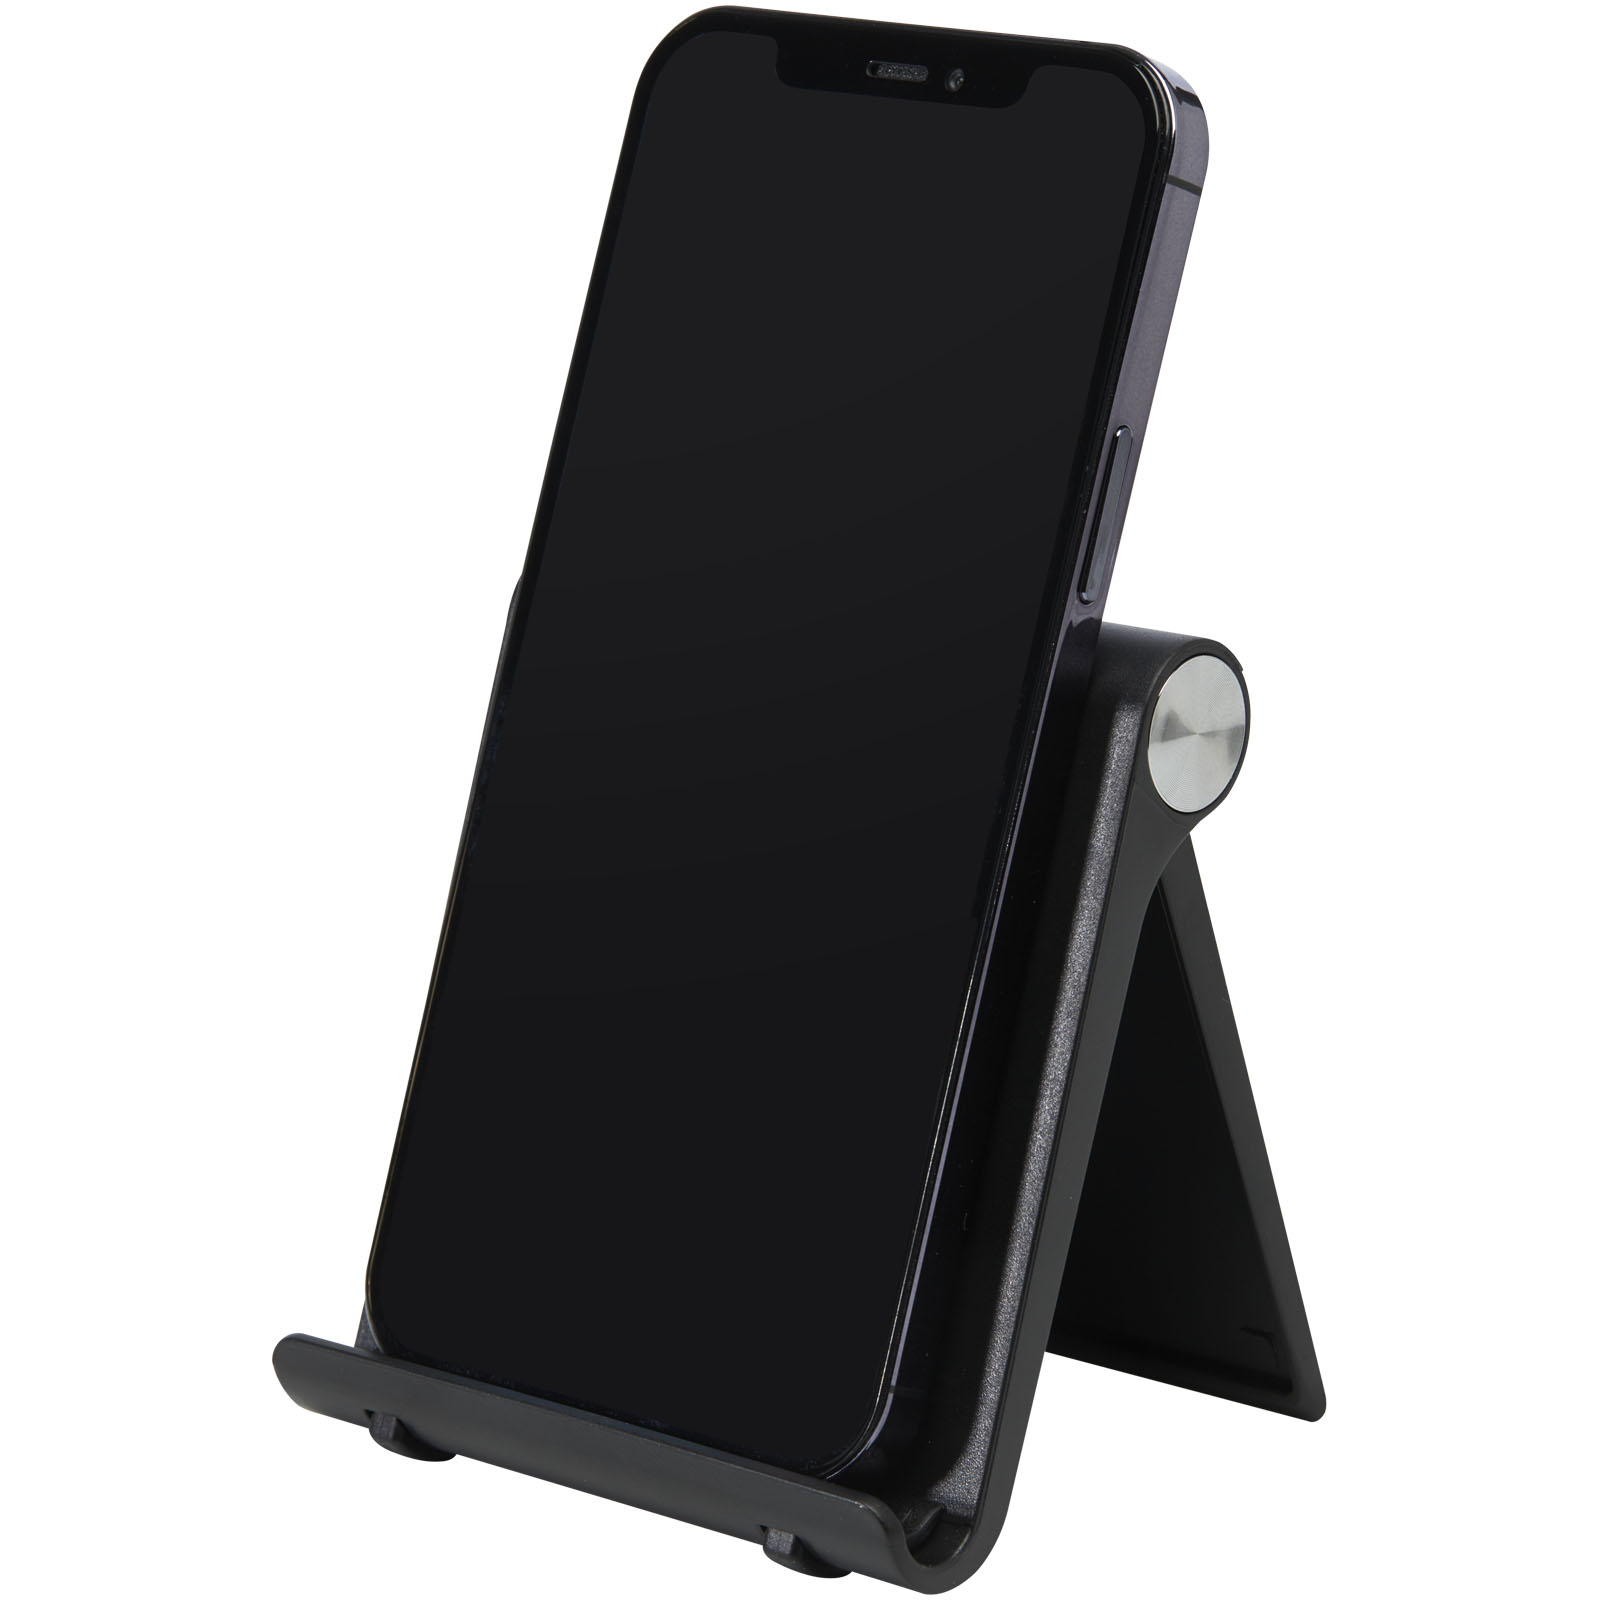 Advertising Stands & Holders - Resty phone and tablet stand - 0